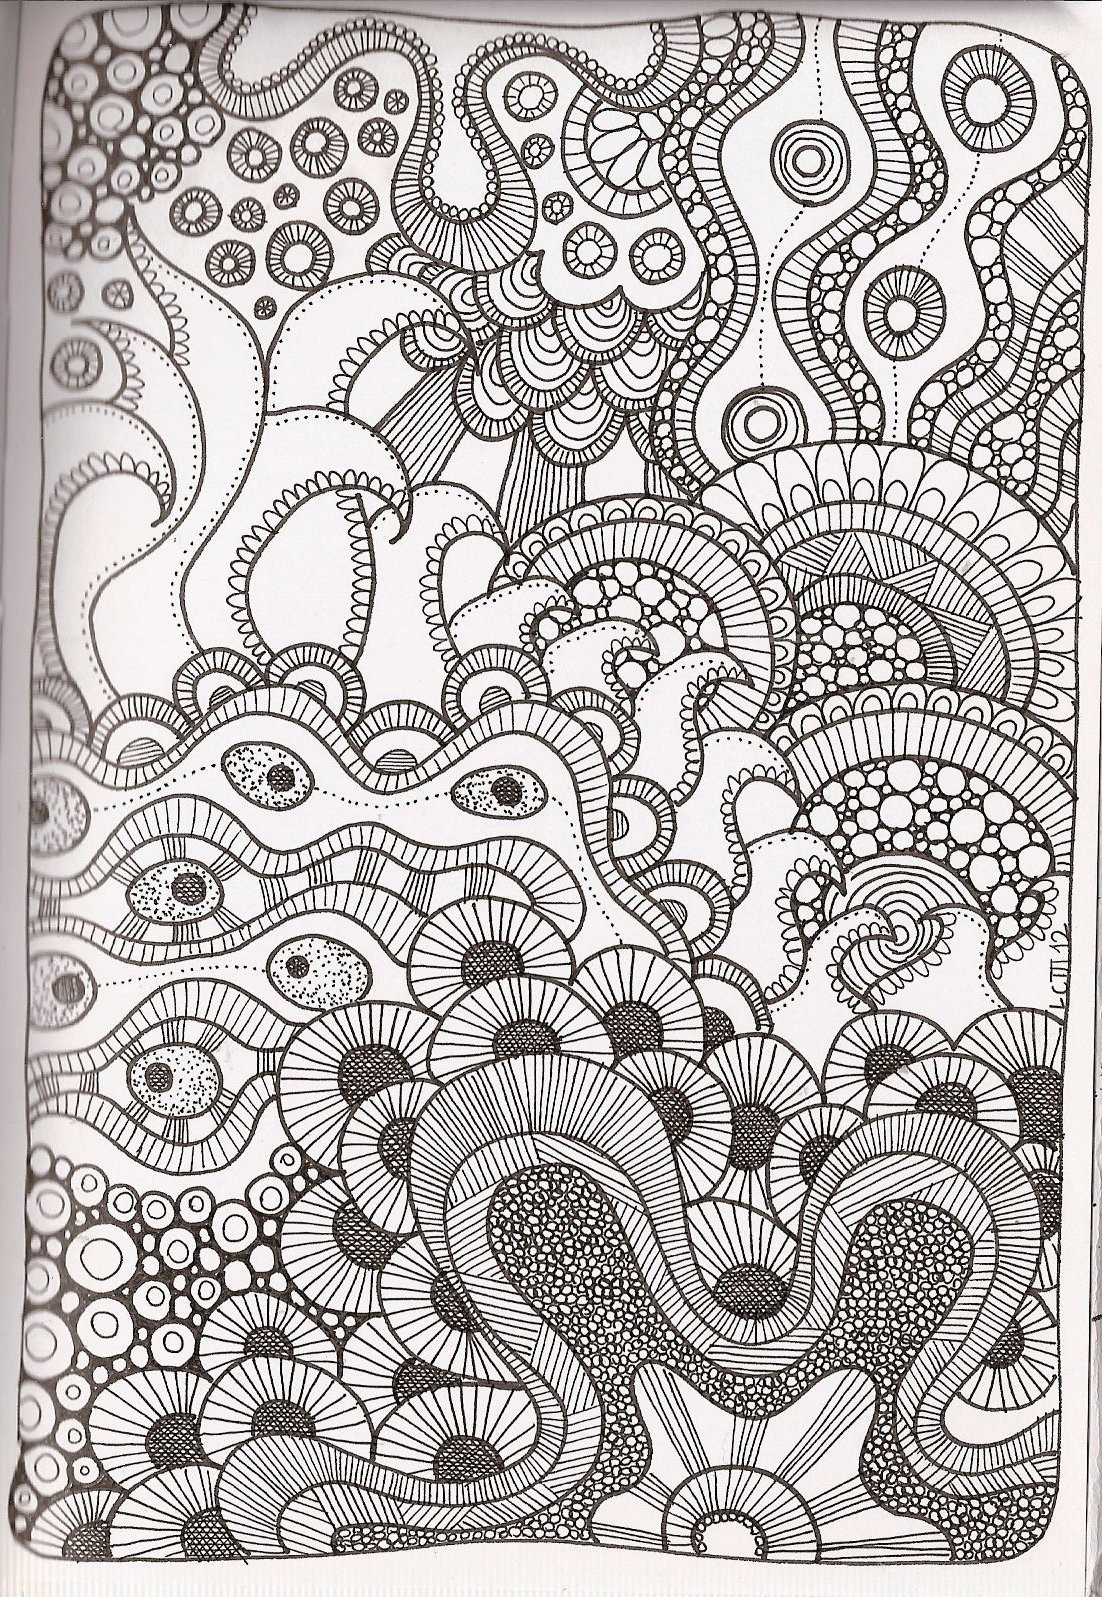 Printable Coloring Pages For Adults
 Free Printable Zentangle Coloring Pages for Adults